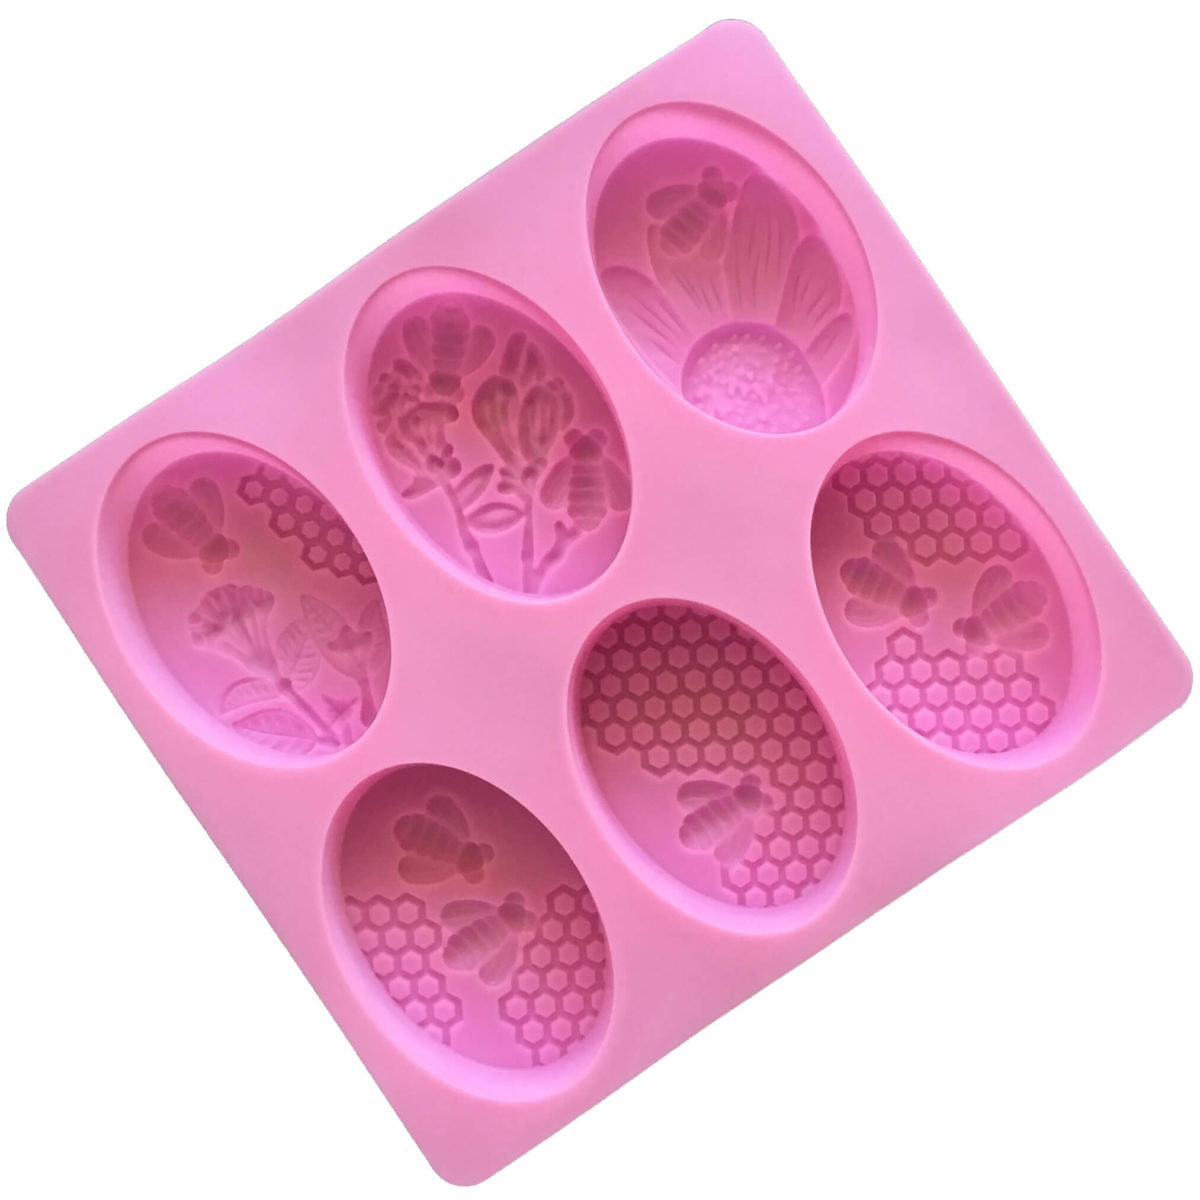 back side of pink silicone mould with six cavites each with a different honey bee theme